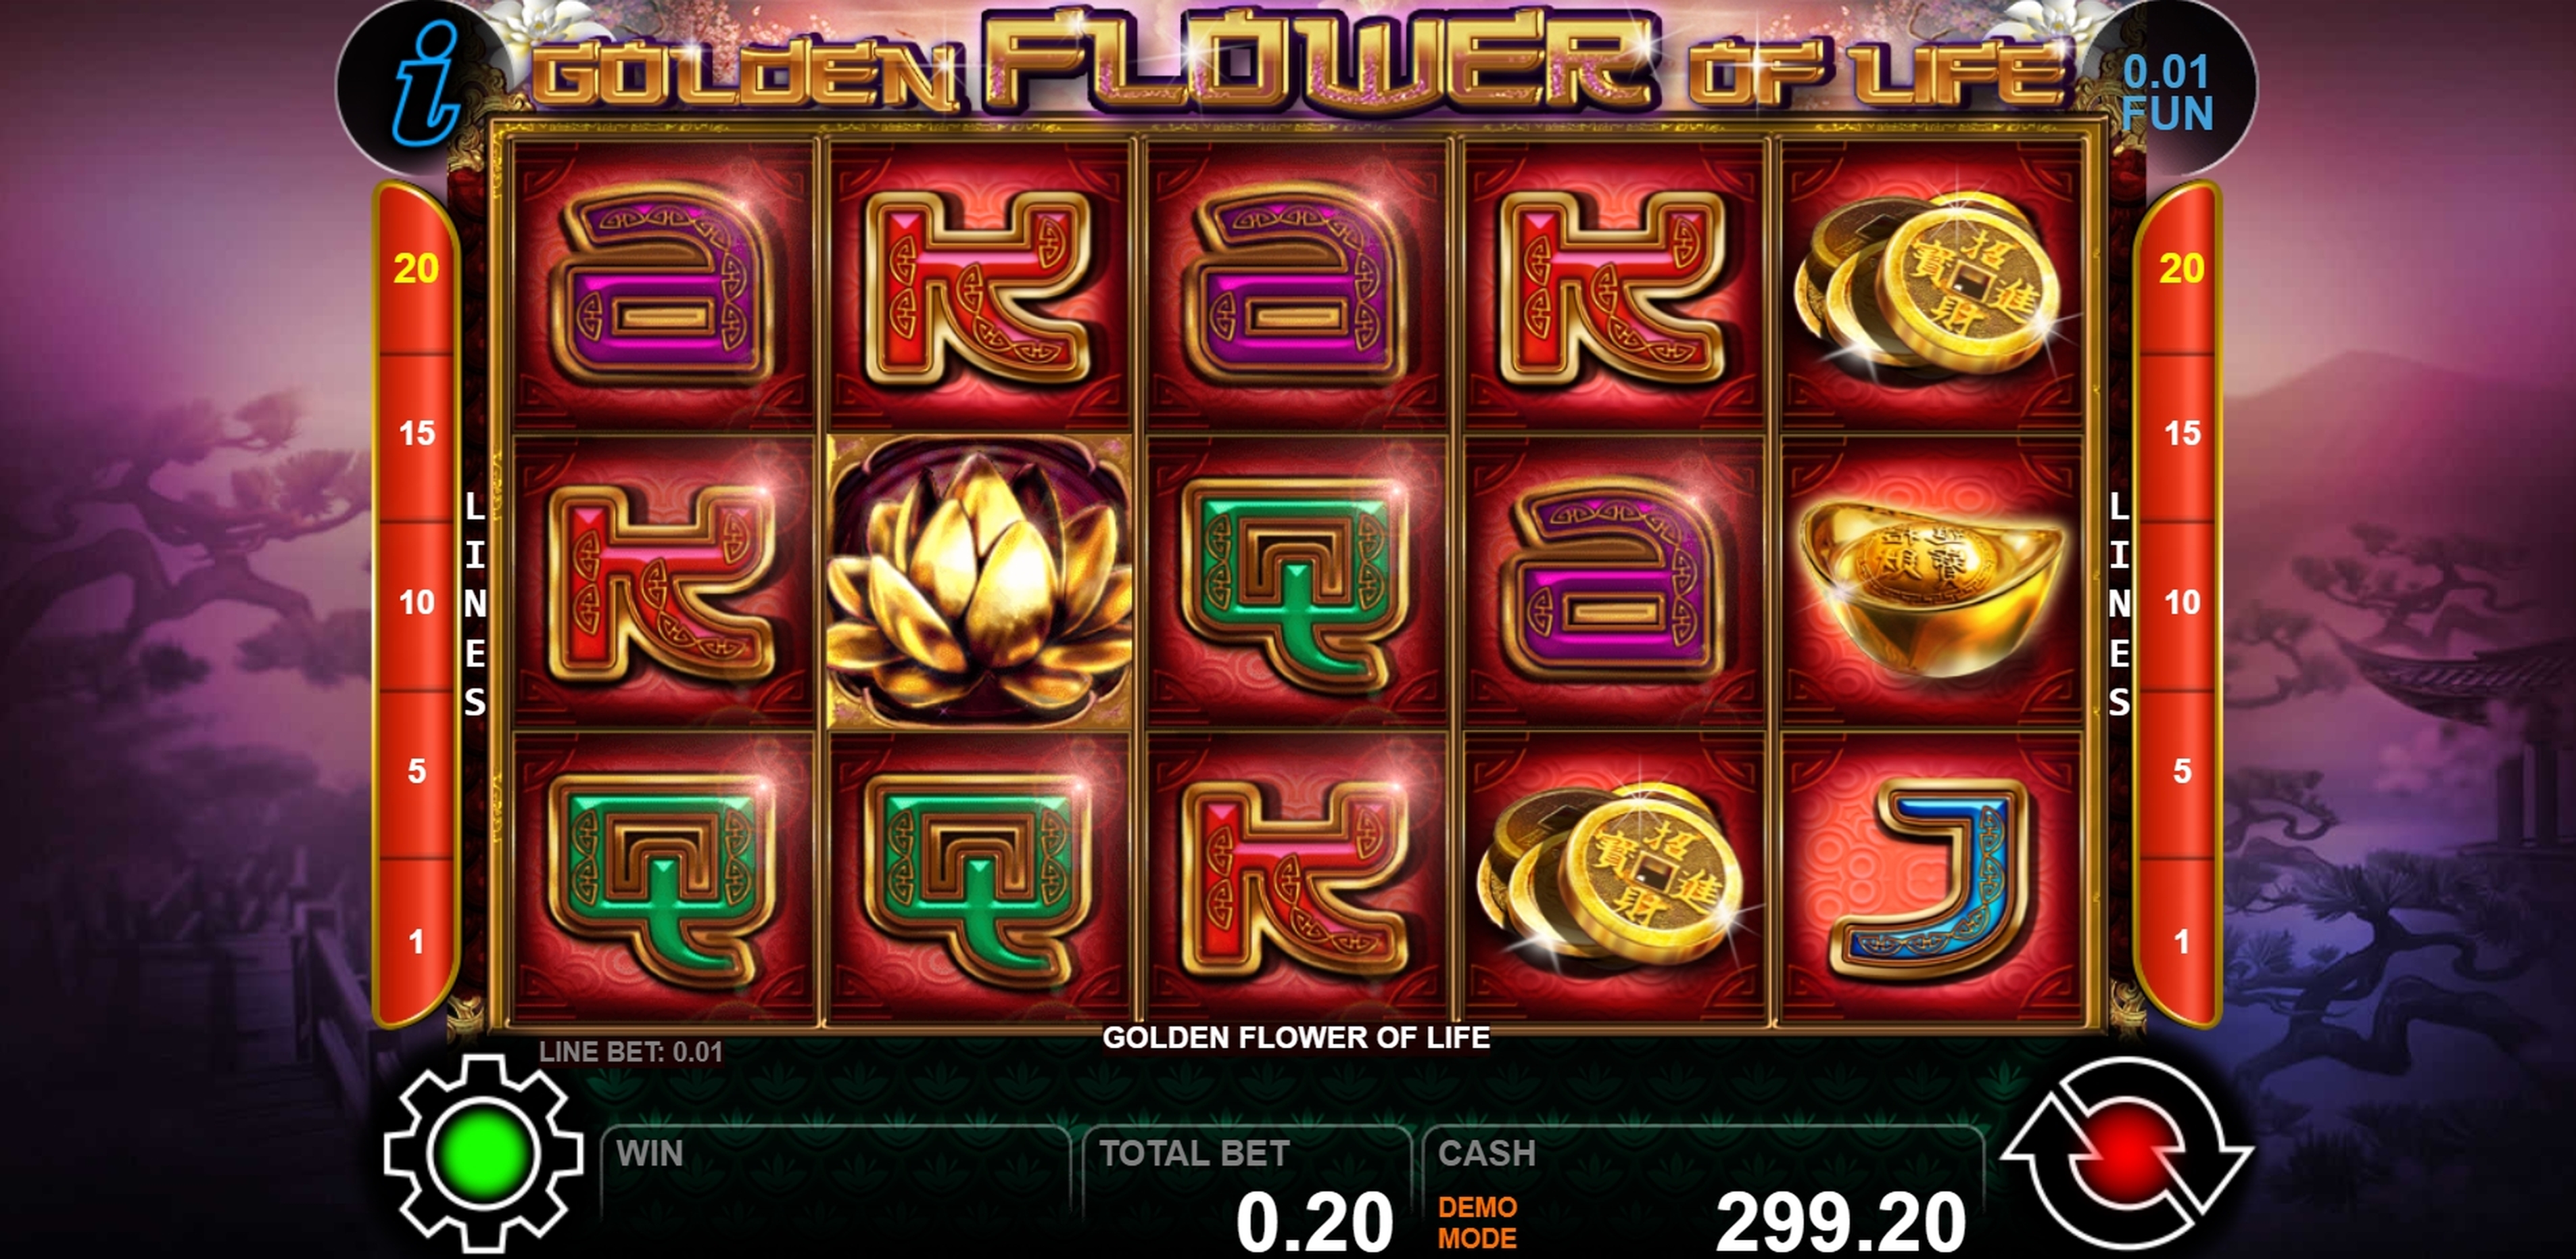 Win Money in Golden Flower Of Life Free Slot Game by casino technology